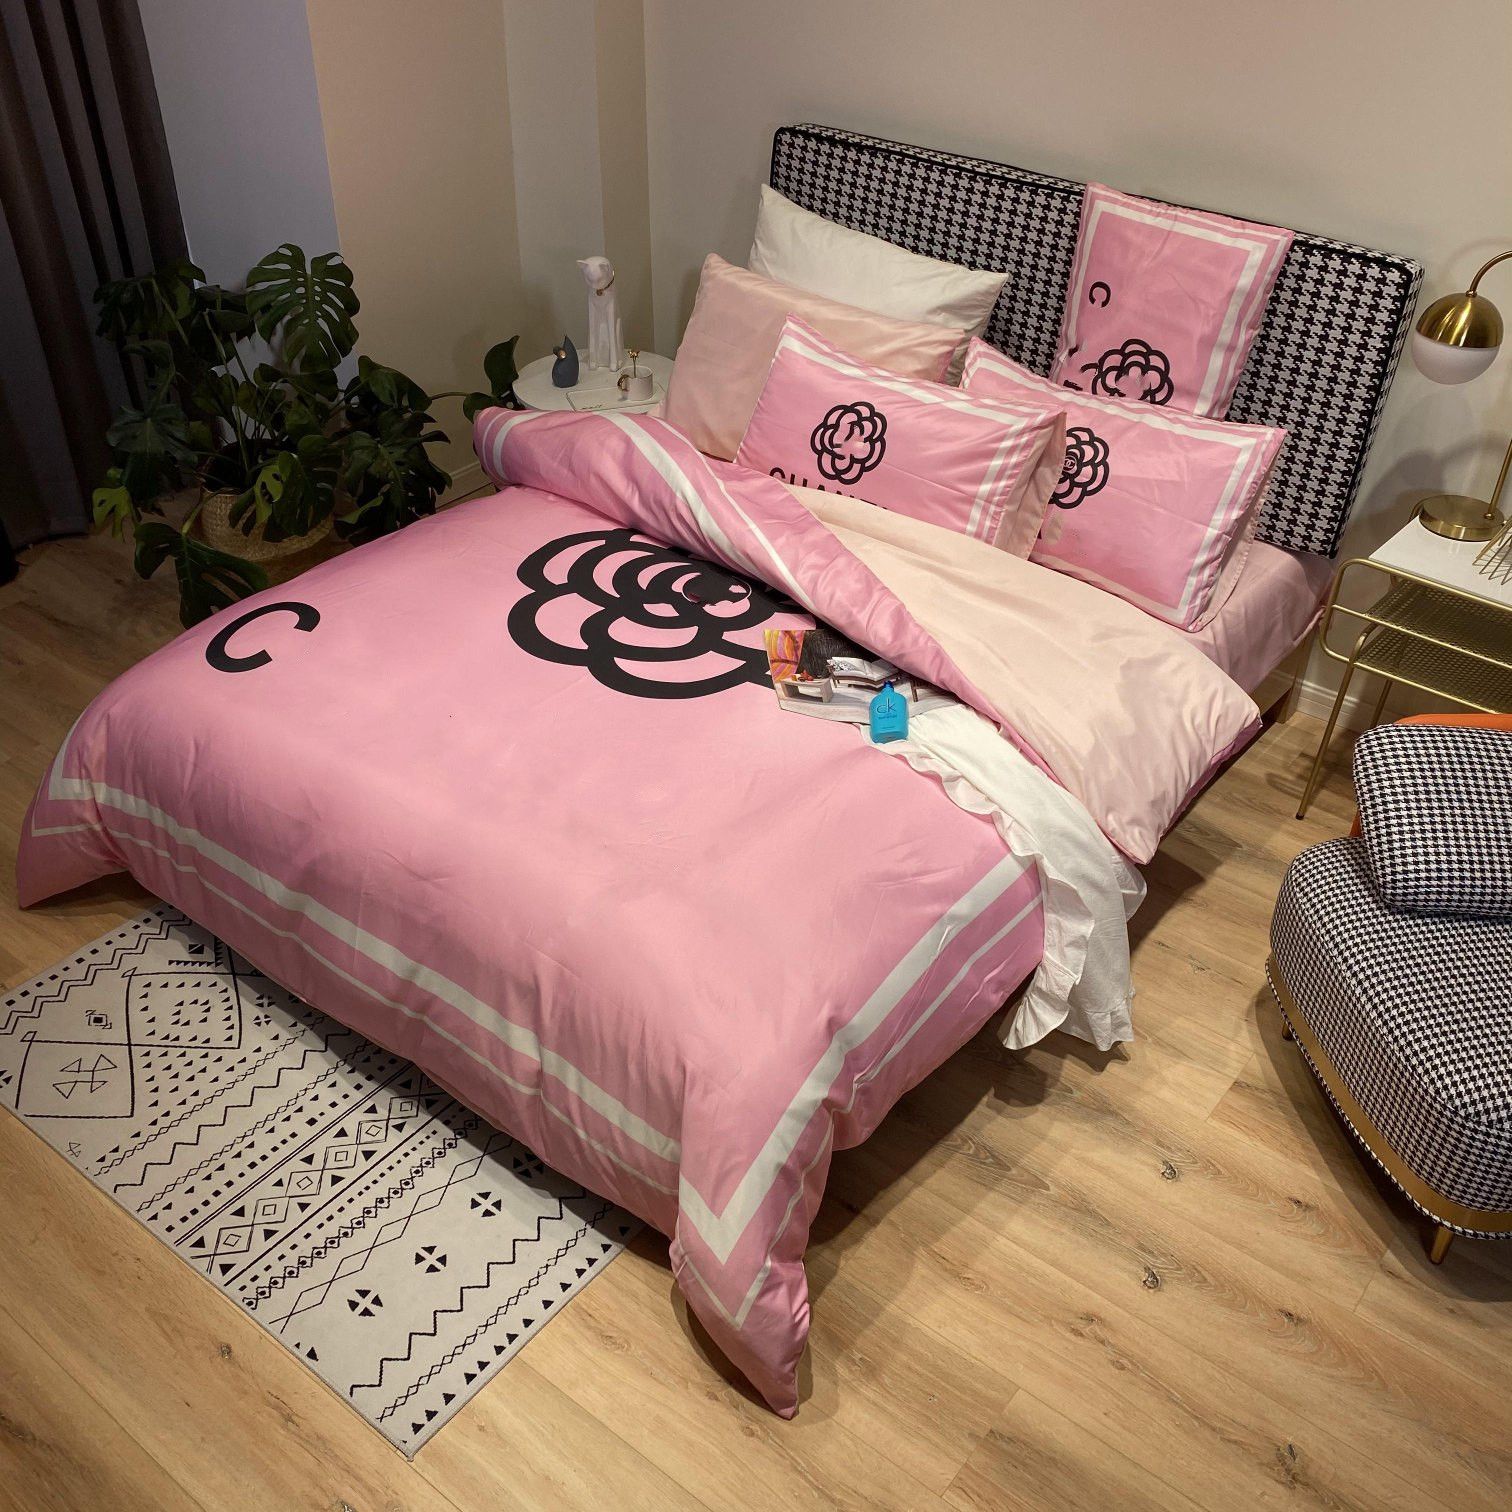 Luxury Pink Designer Pink And Grey Bedding Silk Letter Printed Queen Size  Duvet Cover Bed Sheet Fashion Pillowcases Comforter Set From  Designer_bedding, $103.03